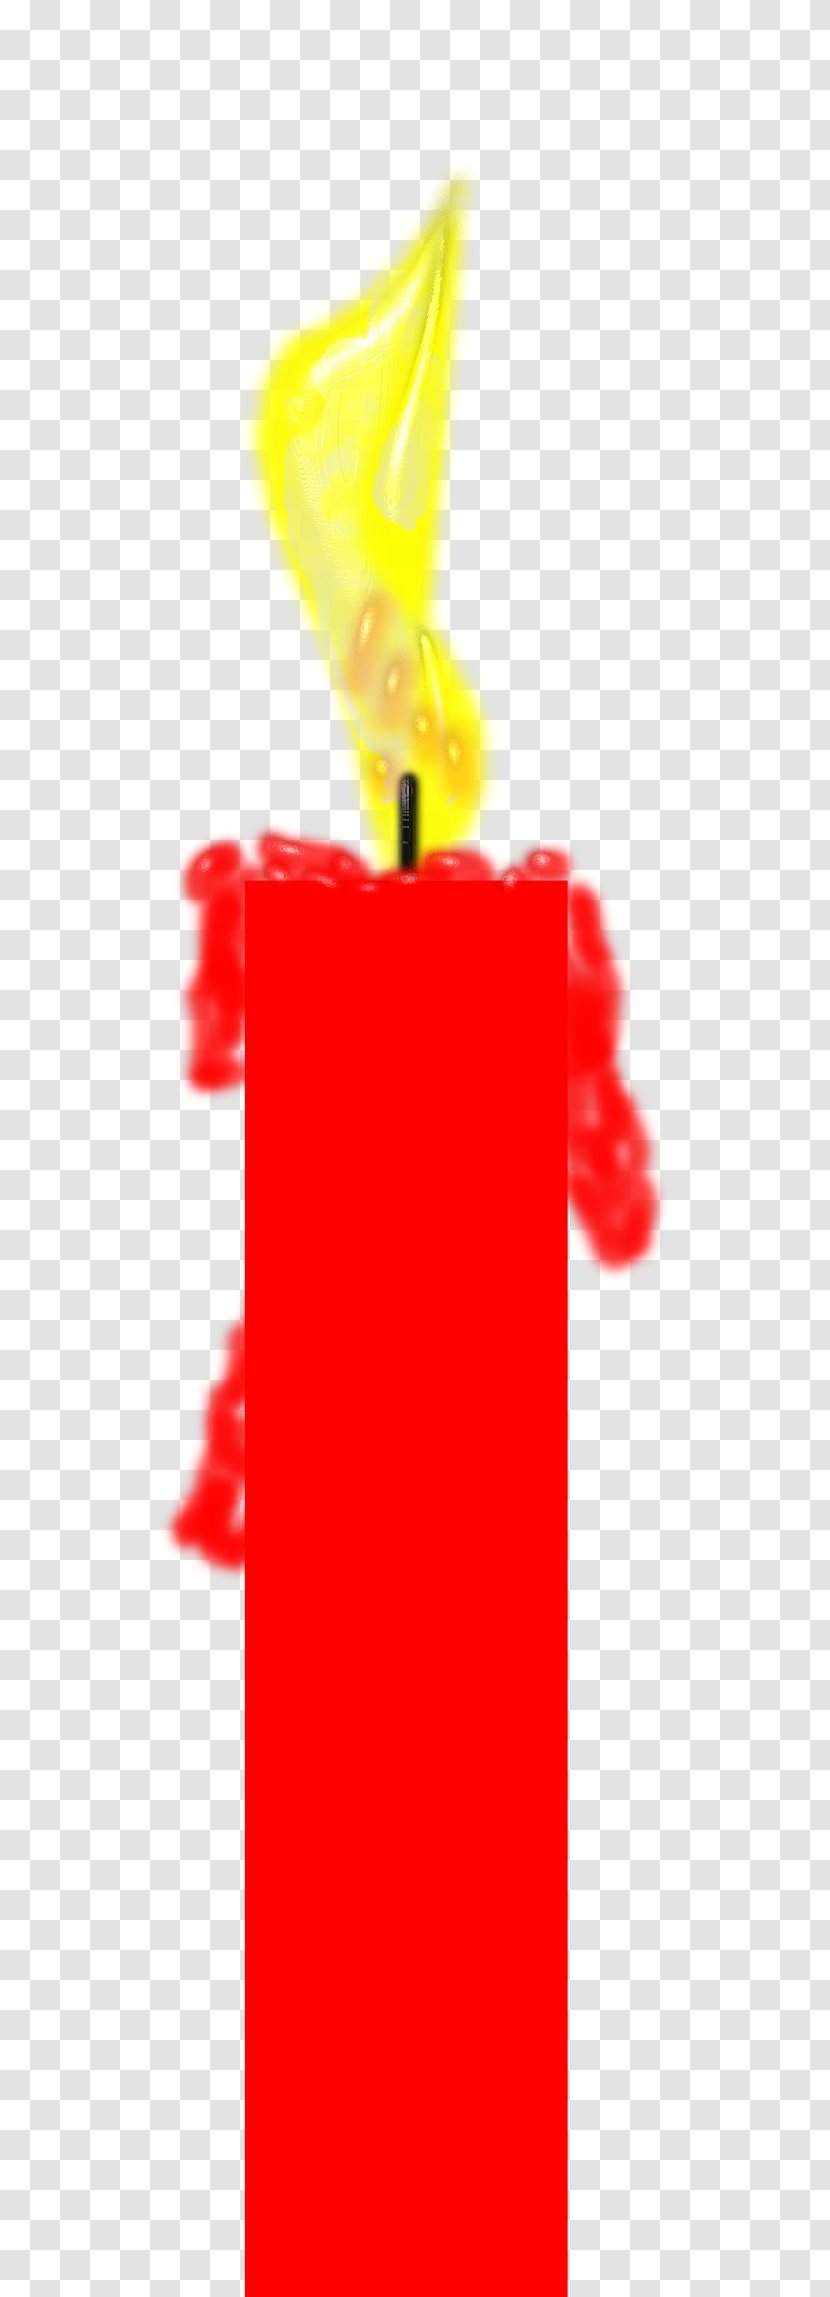 Candle Cocktail Garnish YouTube Clip Art - Drink - Six Transparent PNG